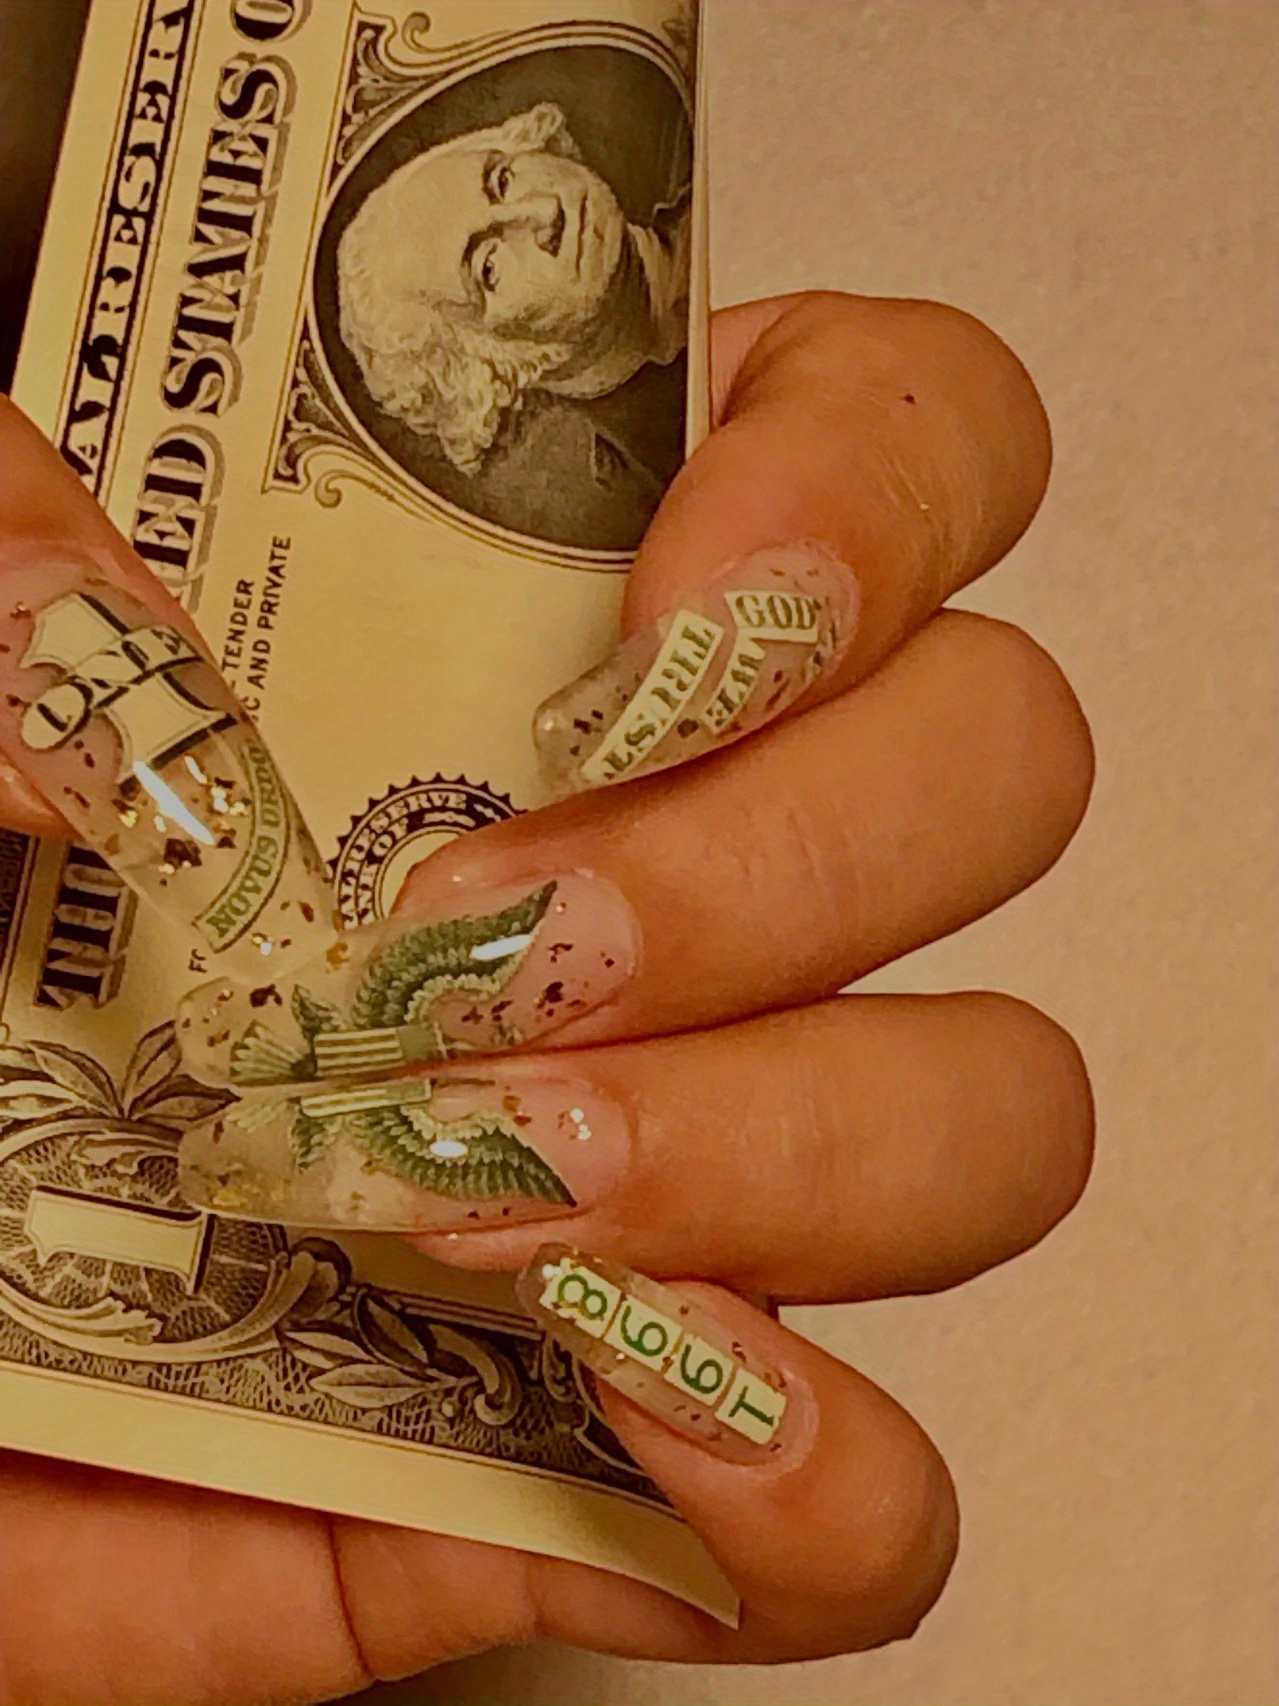 Money Nail Stickers – The Additude Shop